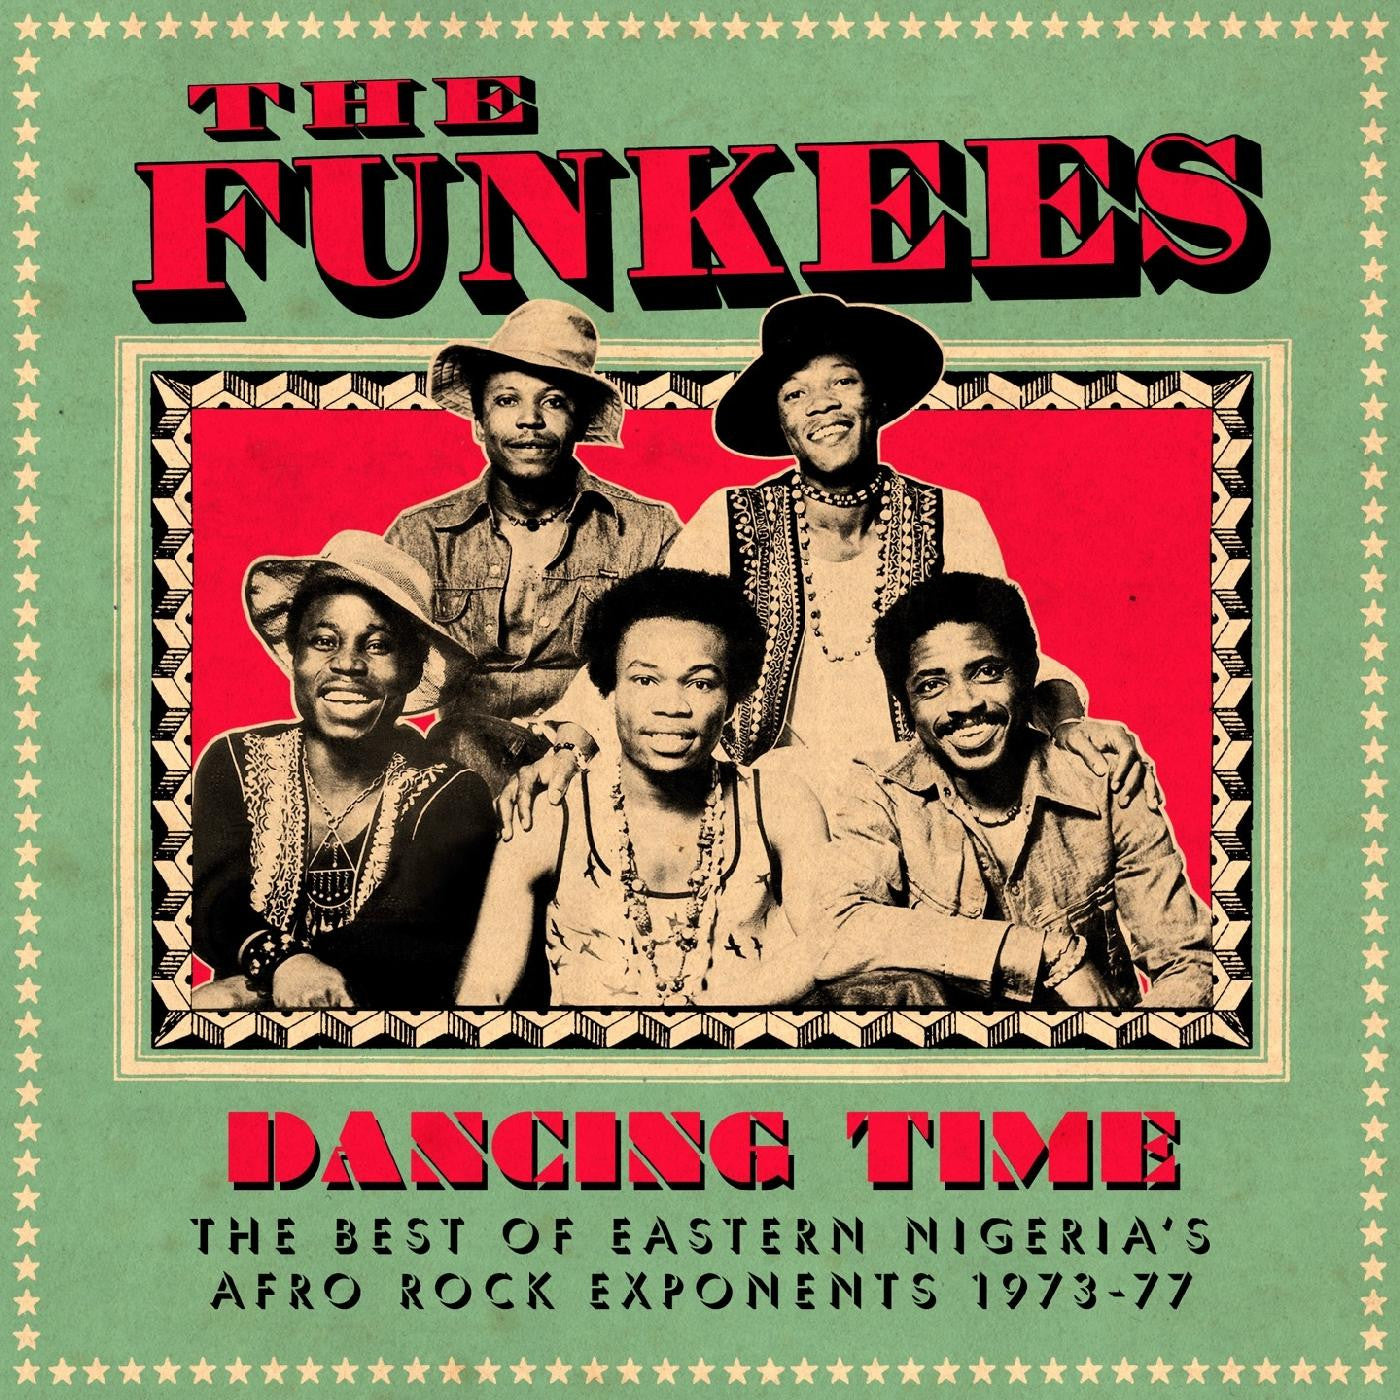 The Funkees - Dancing Time: The Best of Eastern Nigeria's Afro Rock Exponents 1973-77 - 2xLP - Soundway Records